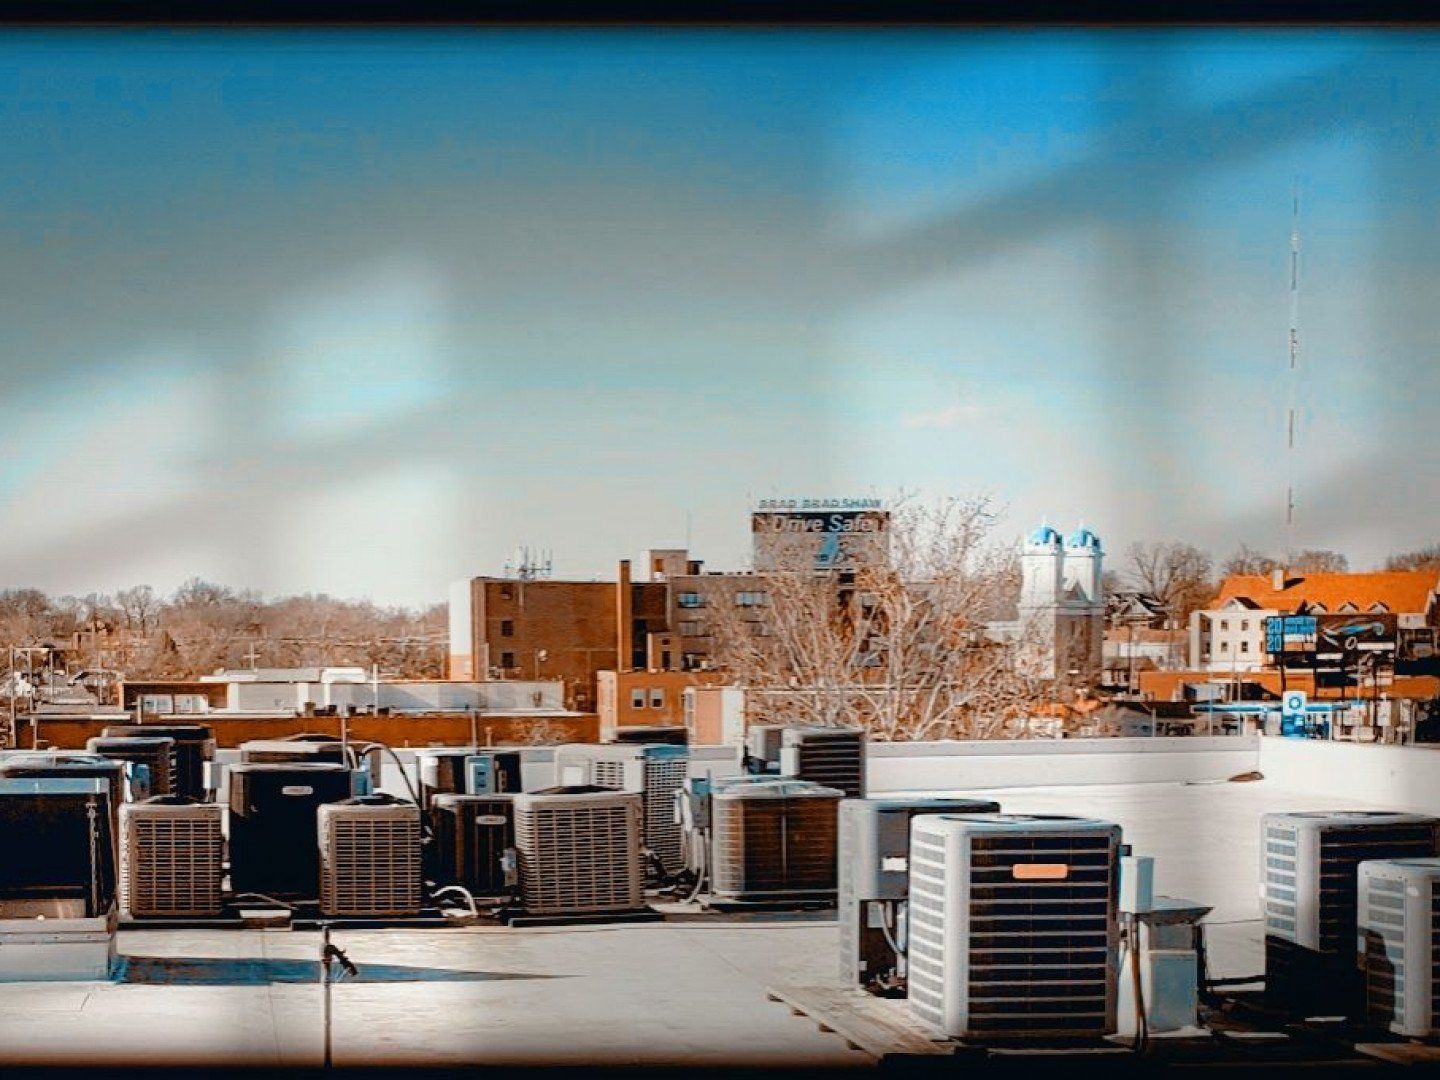 HVAC Units on the Rooftop